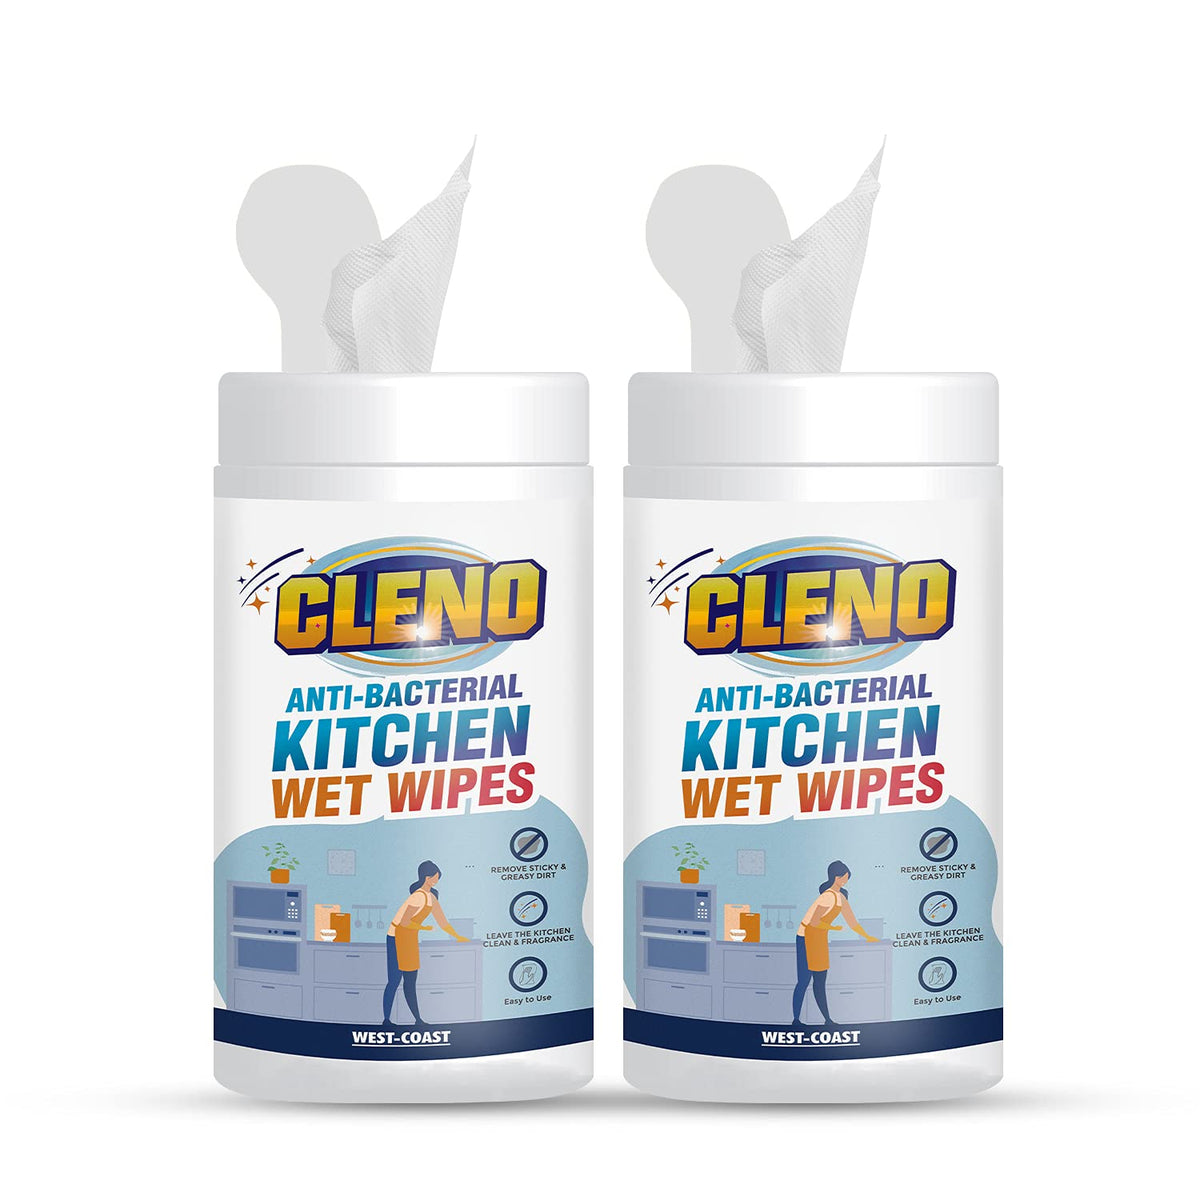 Cleno Kitchen Wet Wipes to Clean Sticky, Greasy Dirt on Kitchen Platform, Shelves, Jars, Floor, Sink - 50 Wipes (Pack of 2) (Ready to Use)